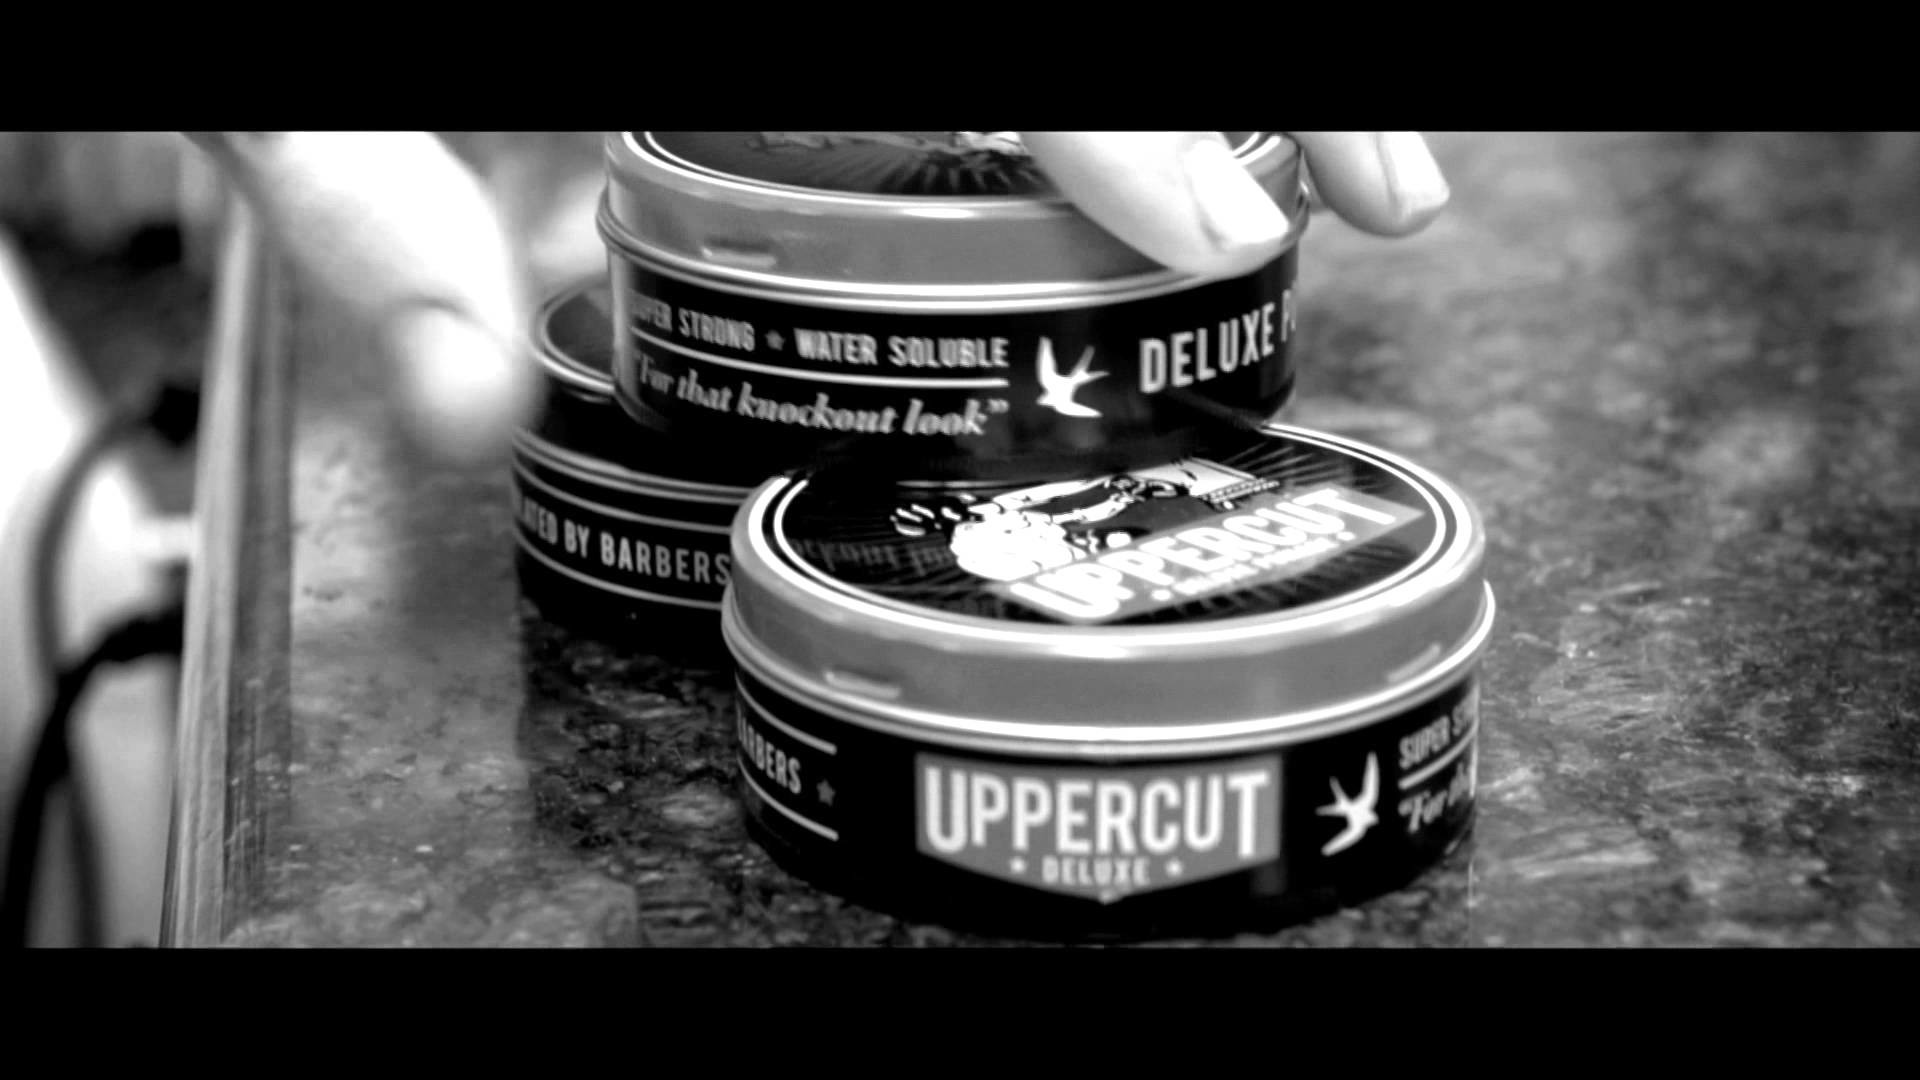 1920x1080 Search Results for “uppercut pomade wallpaper” – Adorable Wallpapers